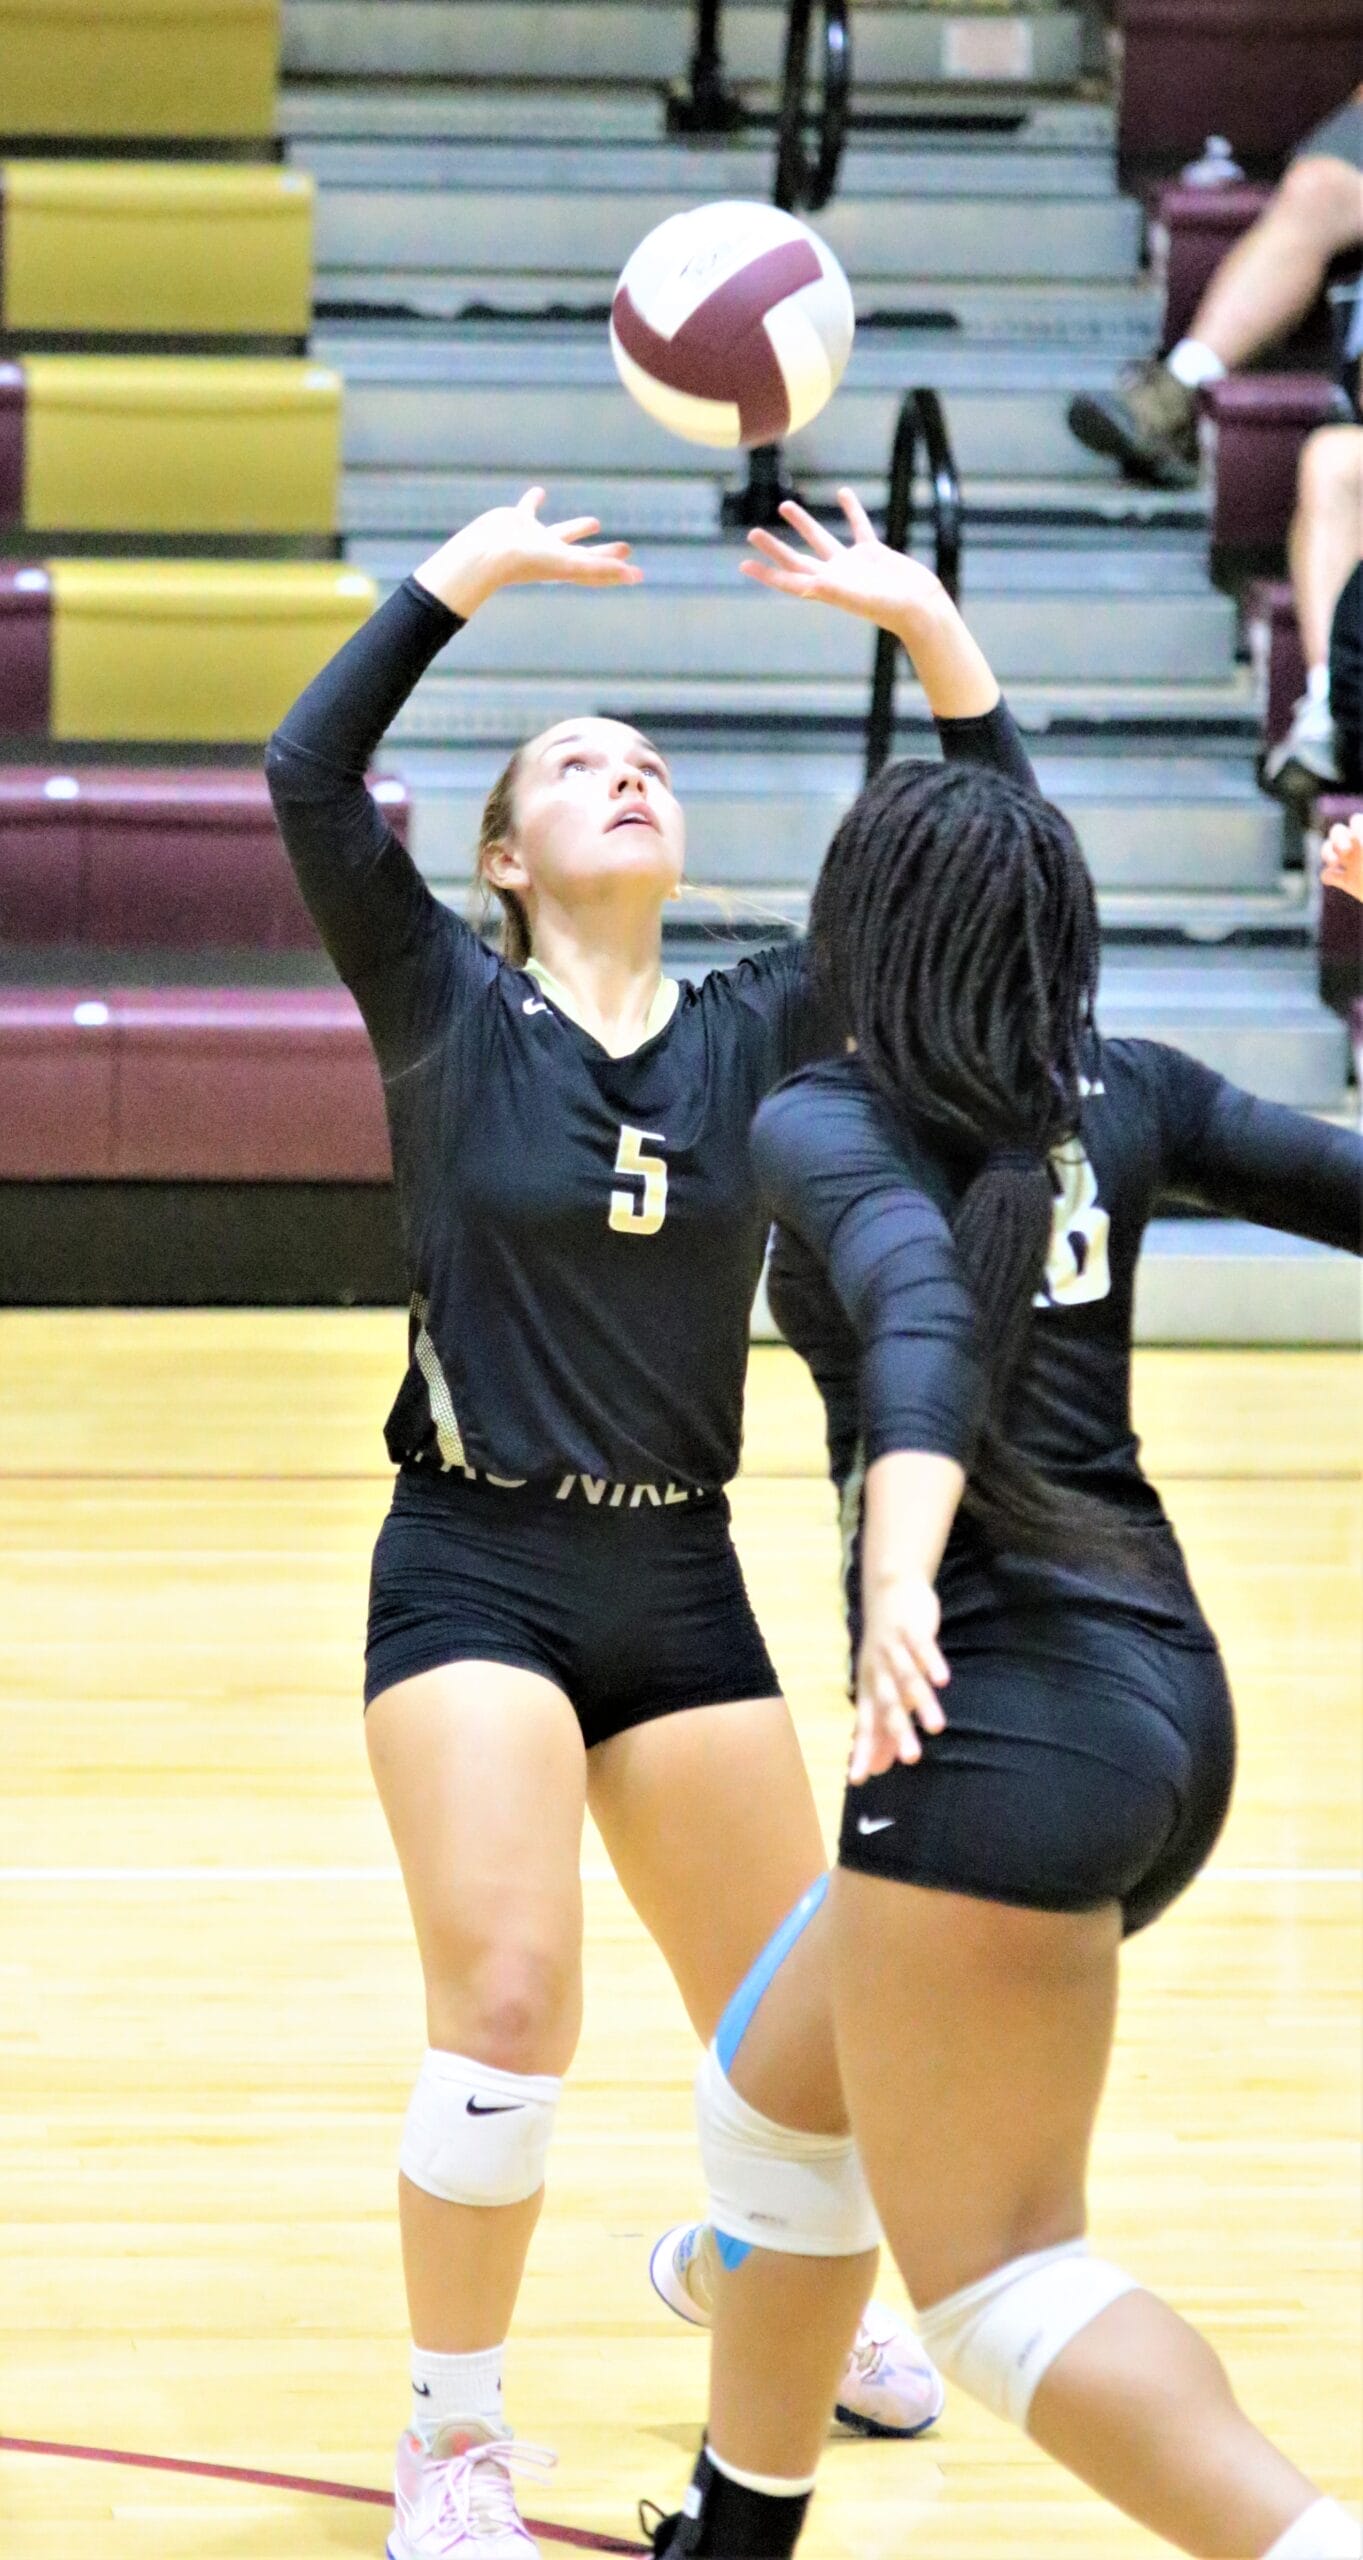 HC tops Triton in five sets